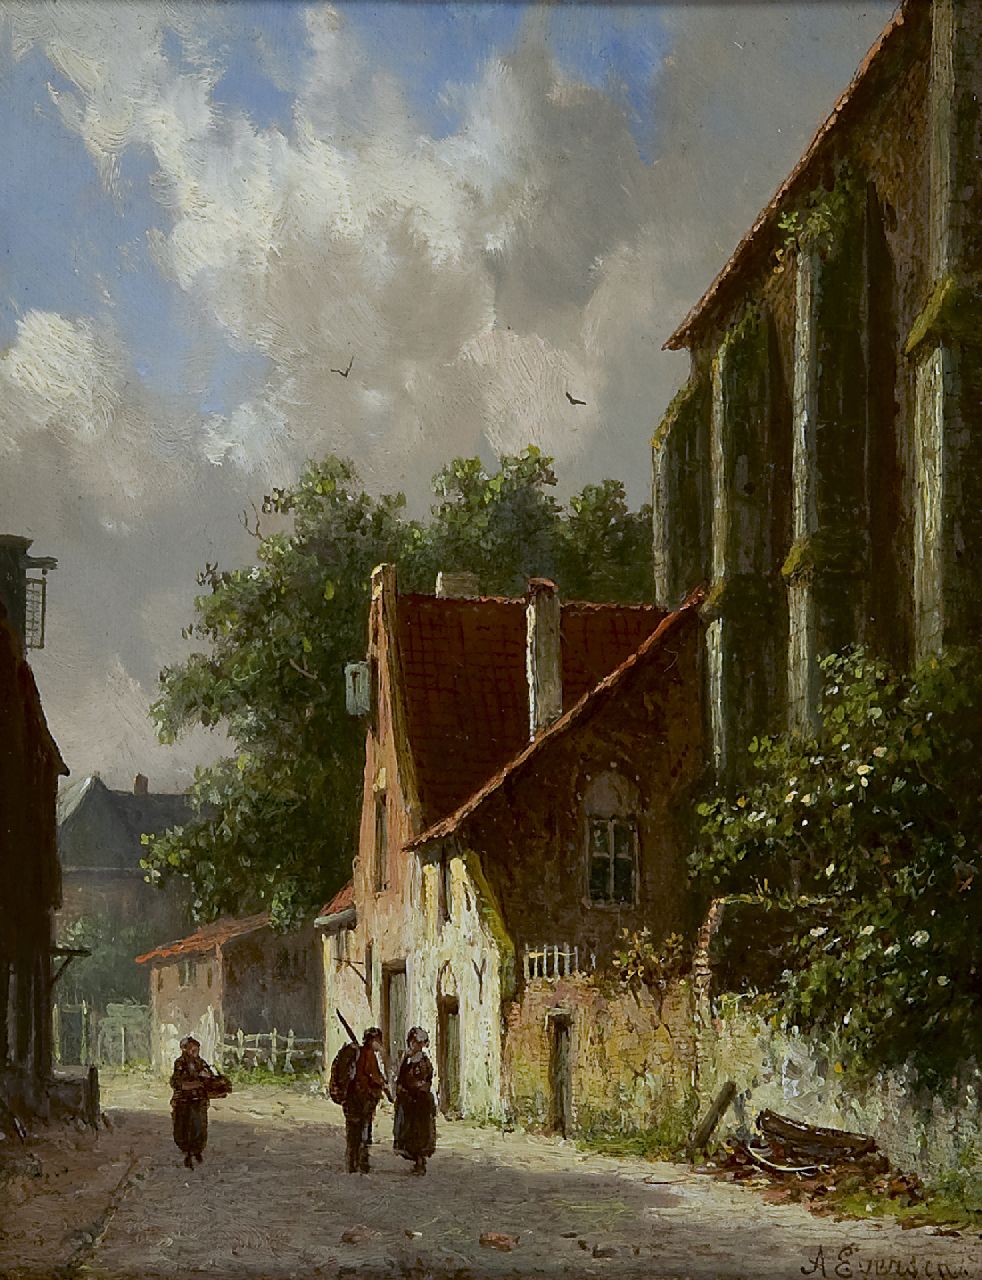 Eversen A.  | Adrianus Eversen, Figures in a sunny village street, oil on panel 18.9 x 14.9 cm, signed l.r. and on a label on the reverse